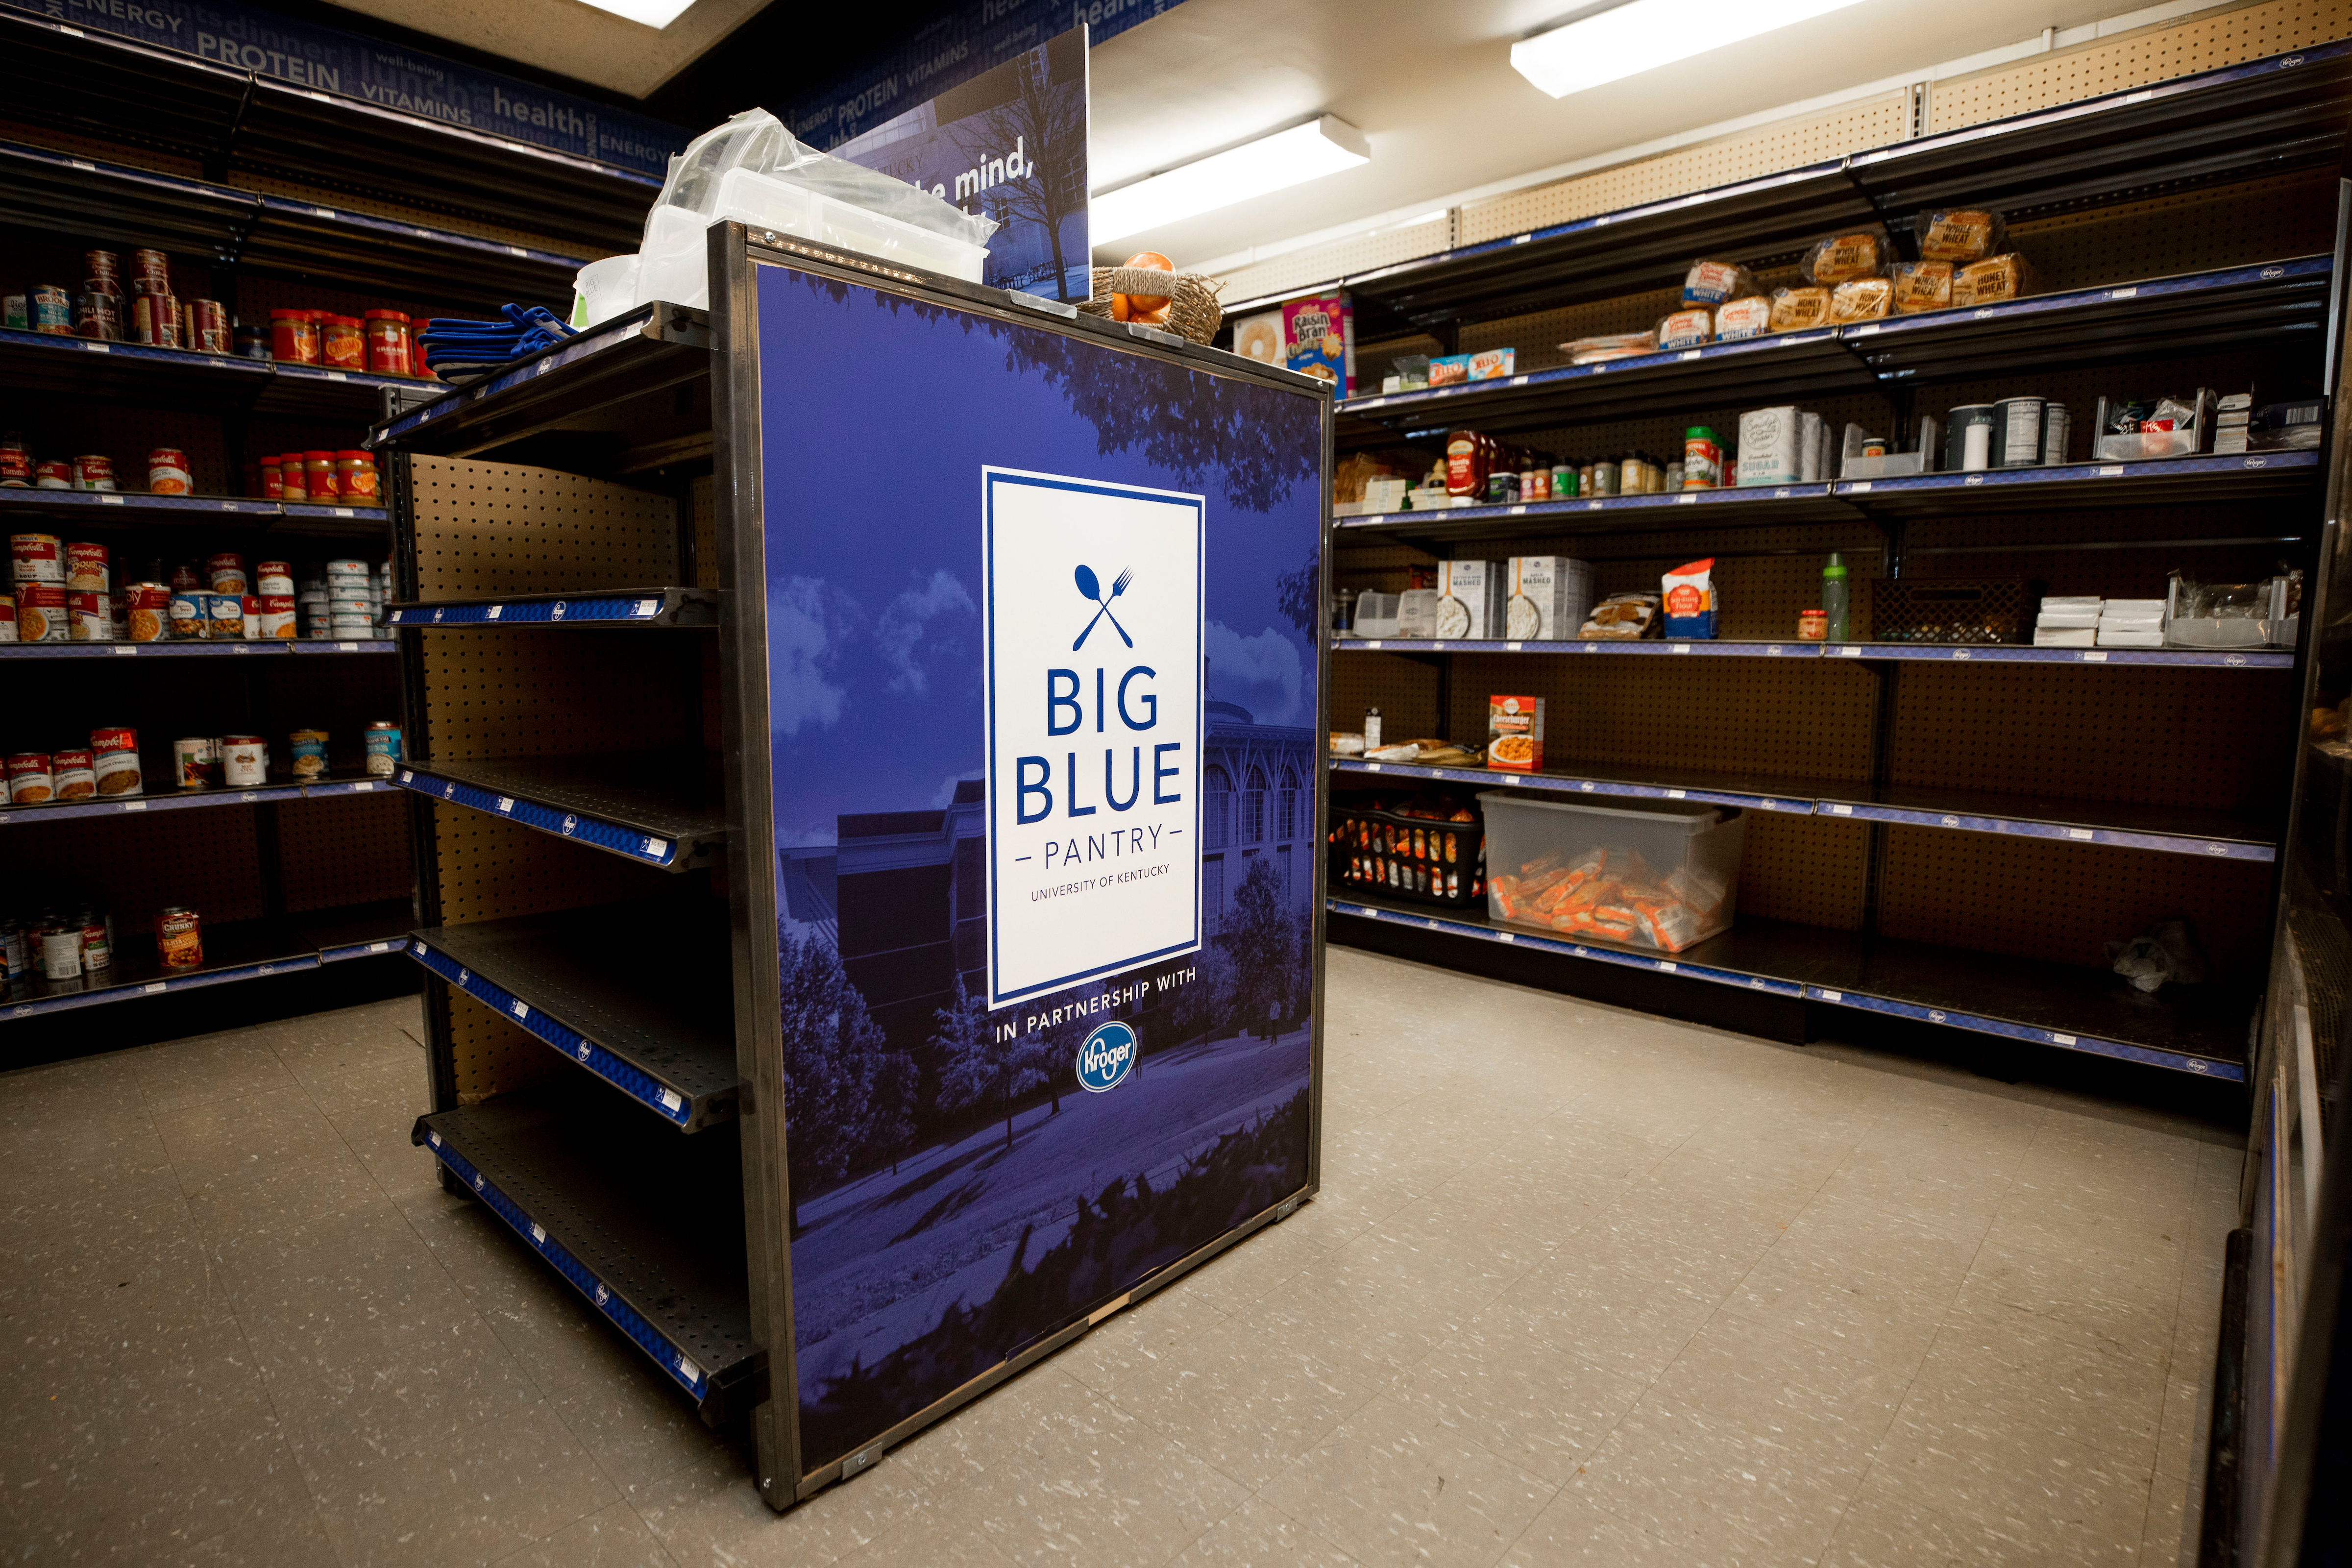 Pictured is the Big Blue Pantry in Whitehall Classroom Building